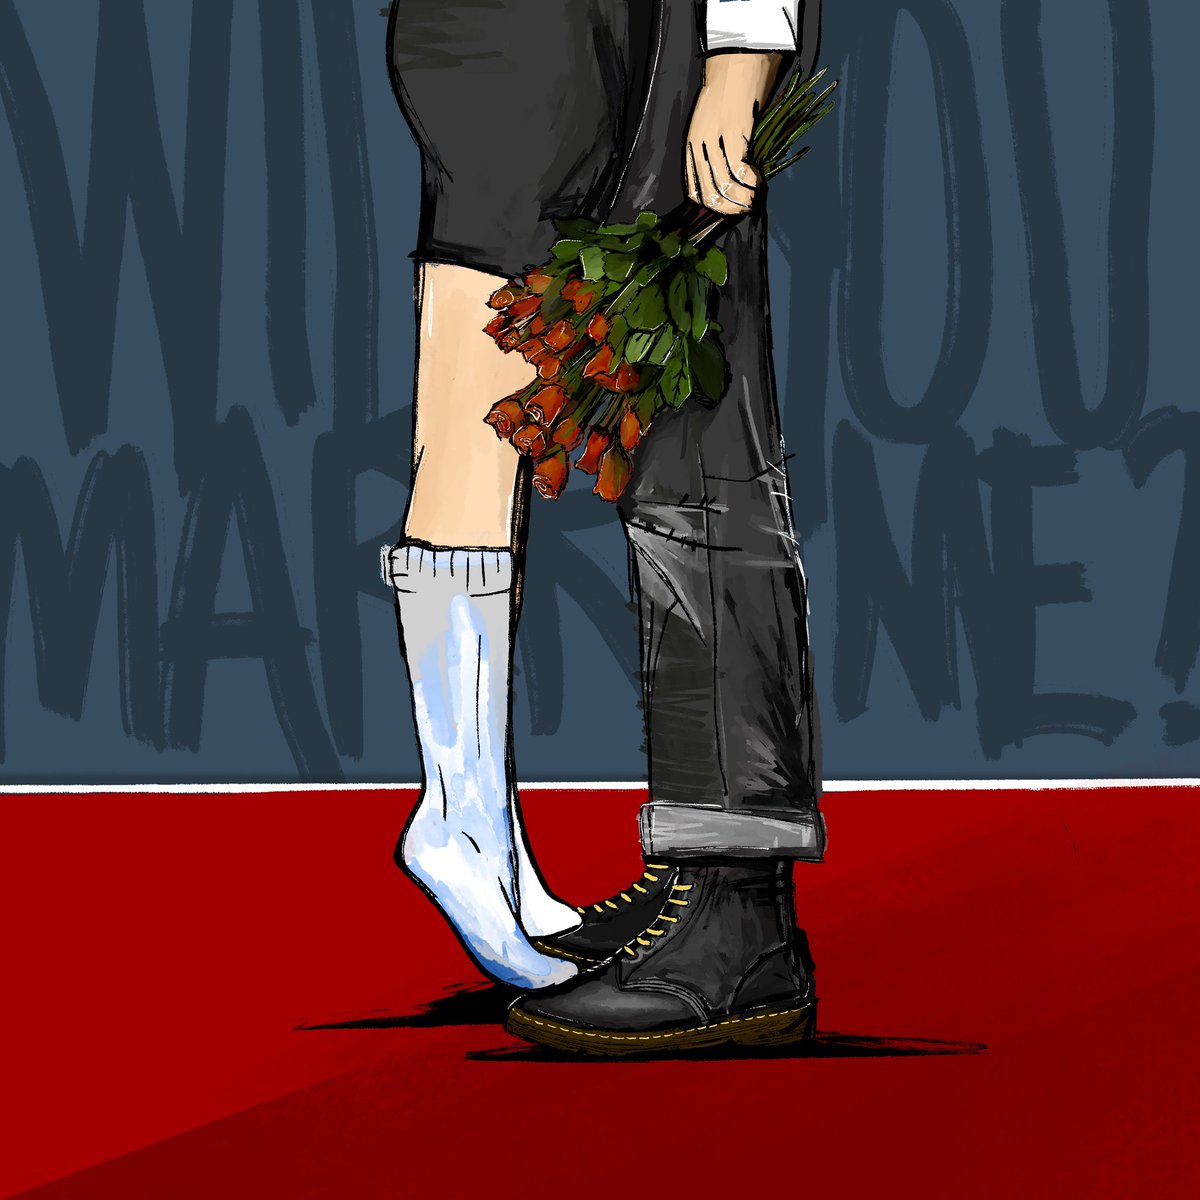 @drmartens My artwork “Kiss me if you can!” for #DMschallenge